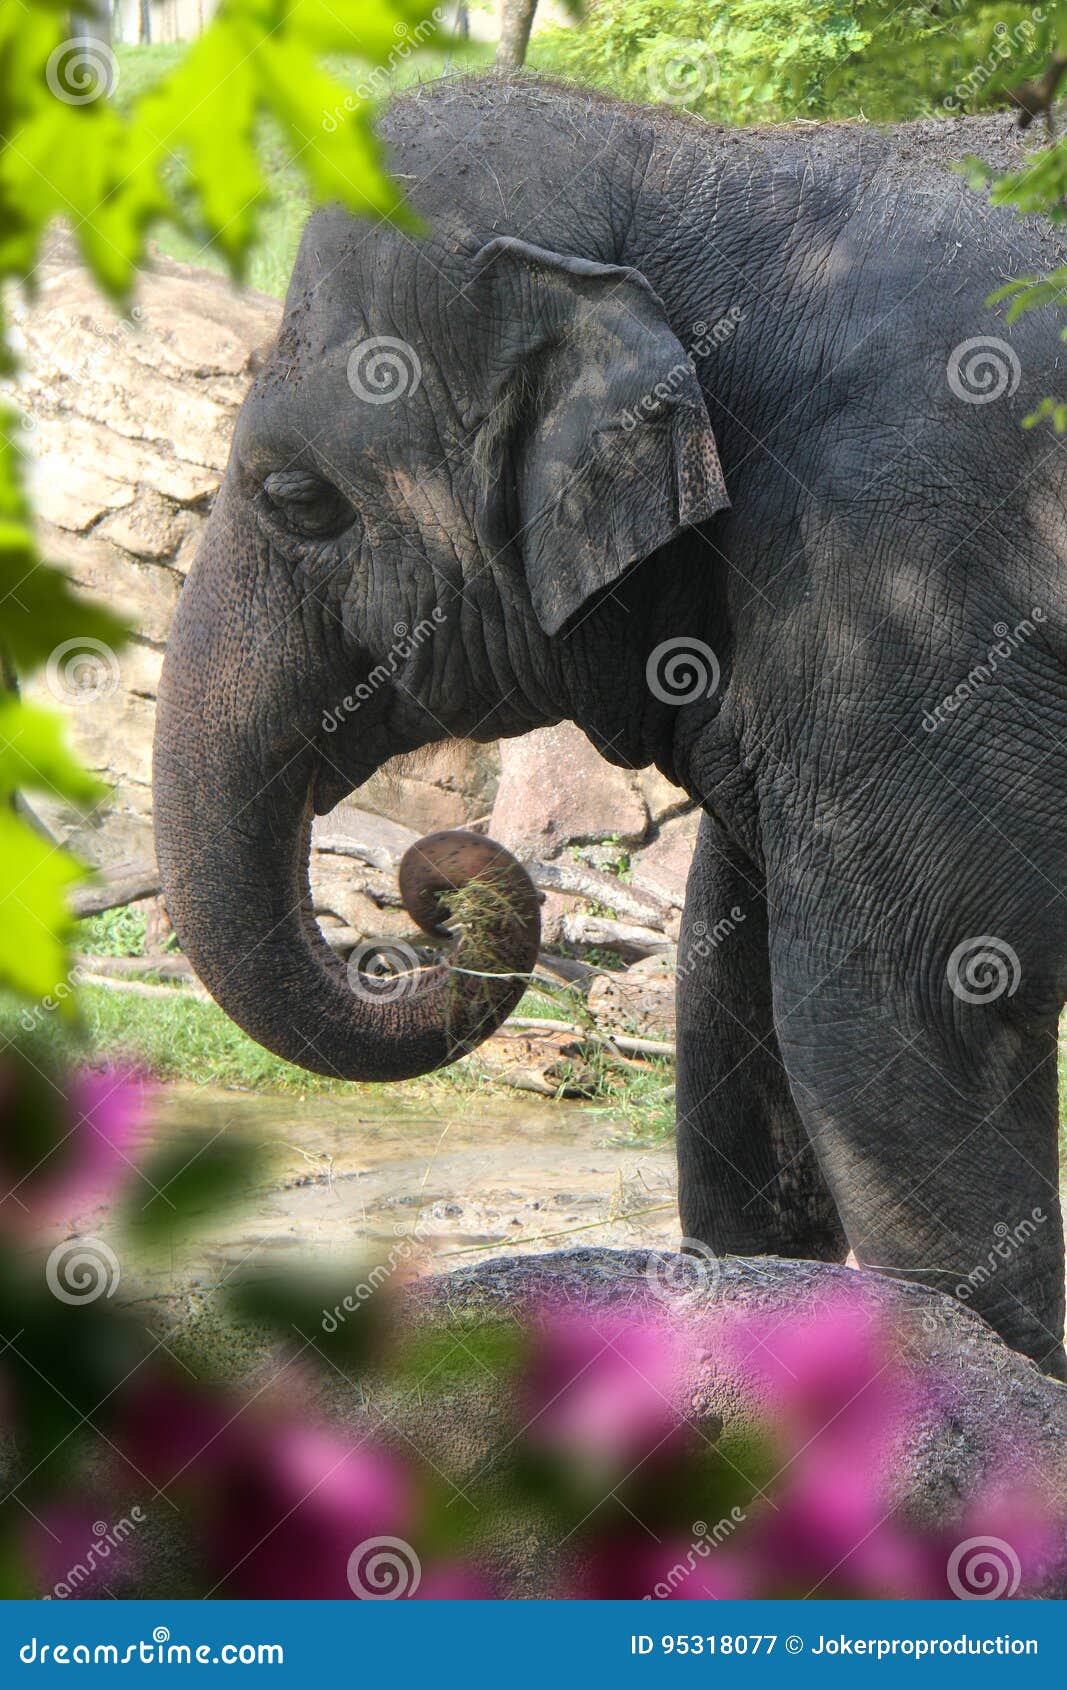 a beutiful picture of an elephat